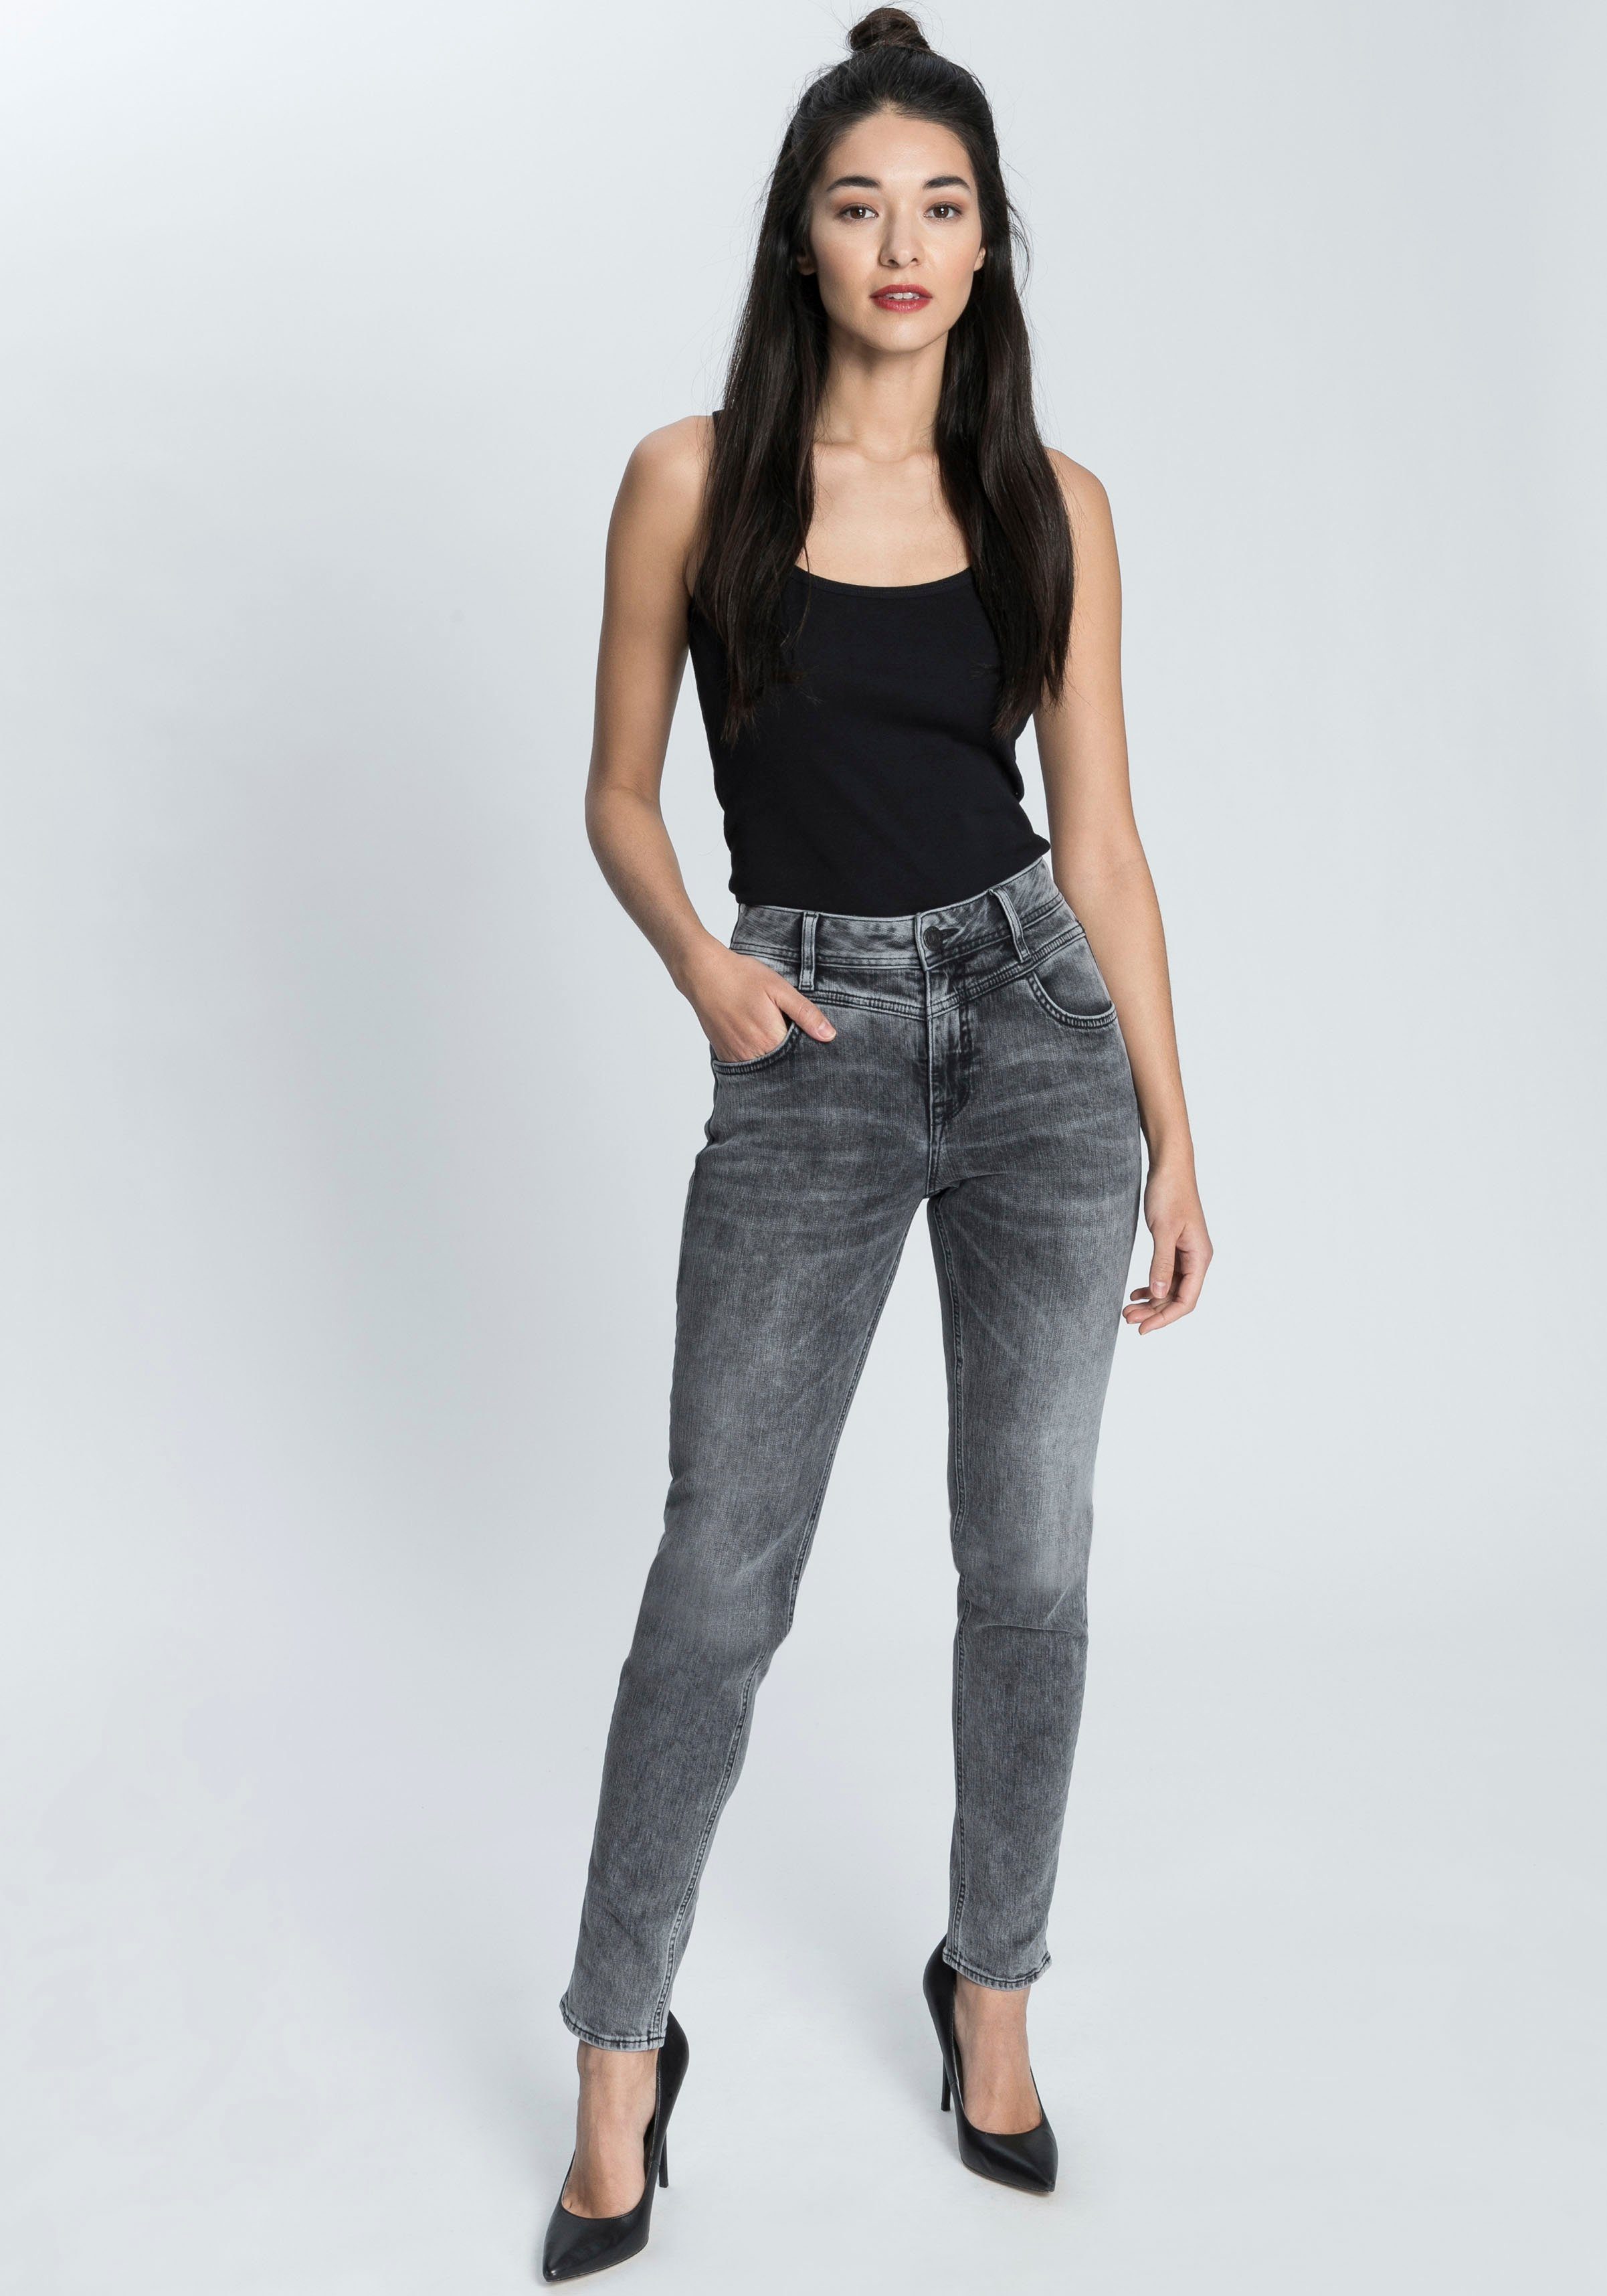 DENIM Herrlicher Slim-fit-Jeans Recycled Waist Normal RECYCLED Polyester 730 PEPPY SLIM silent